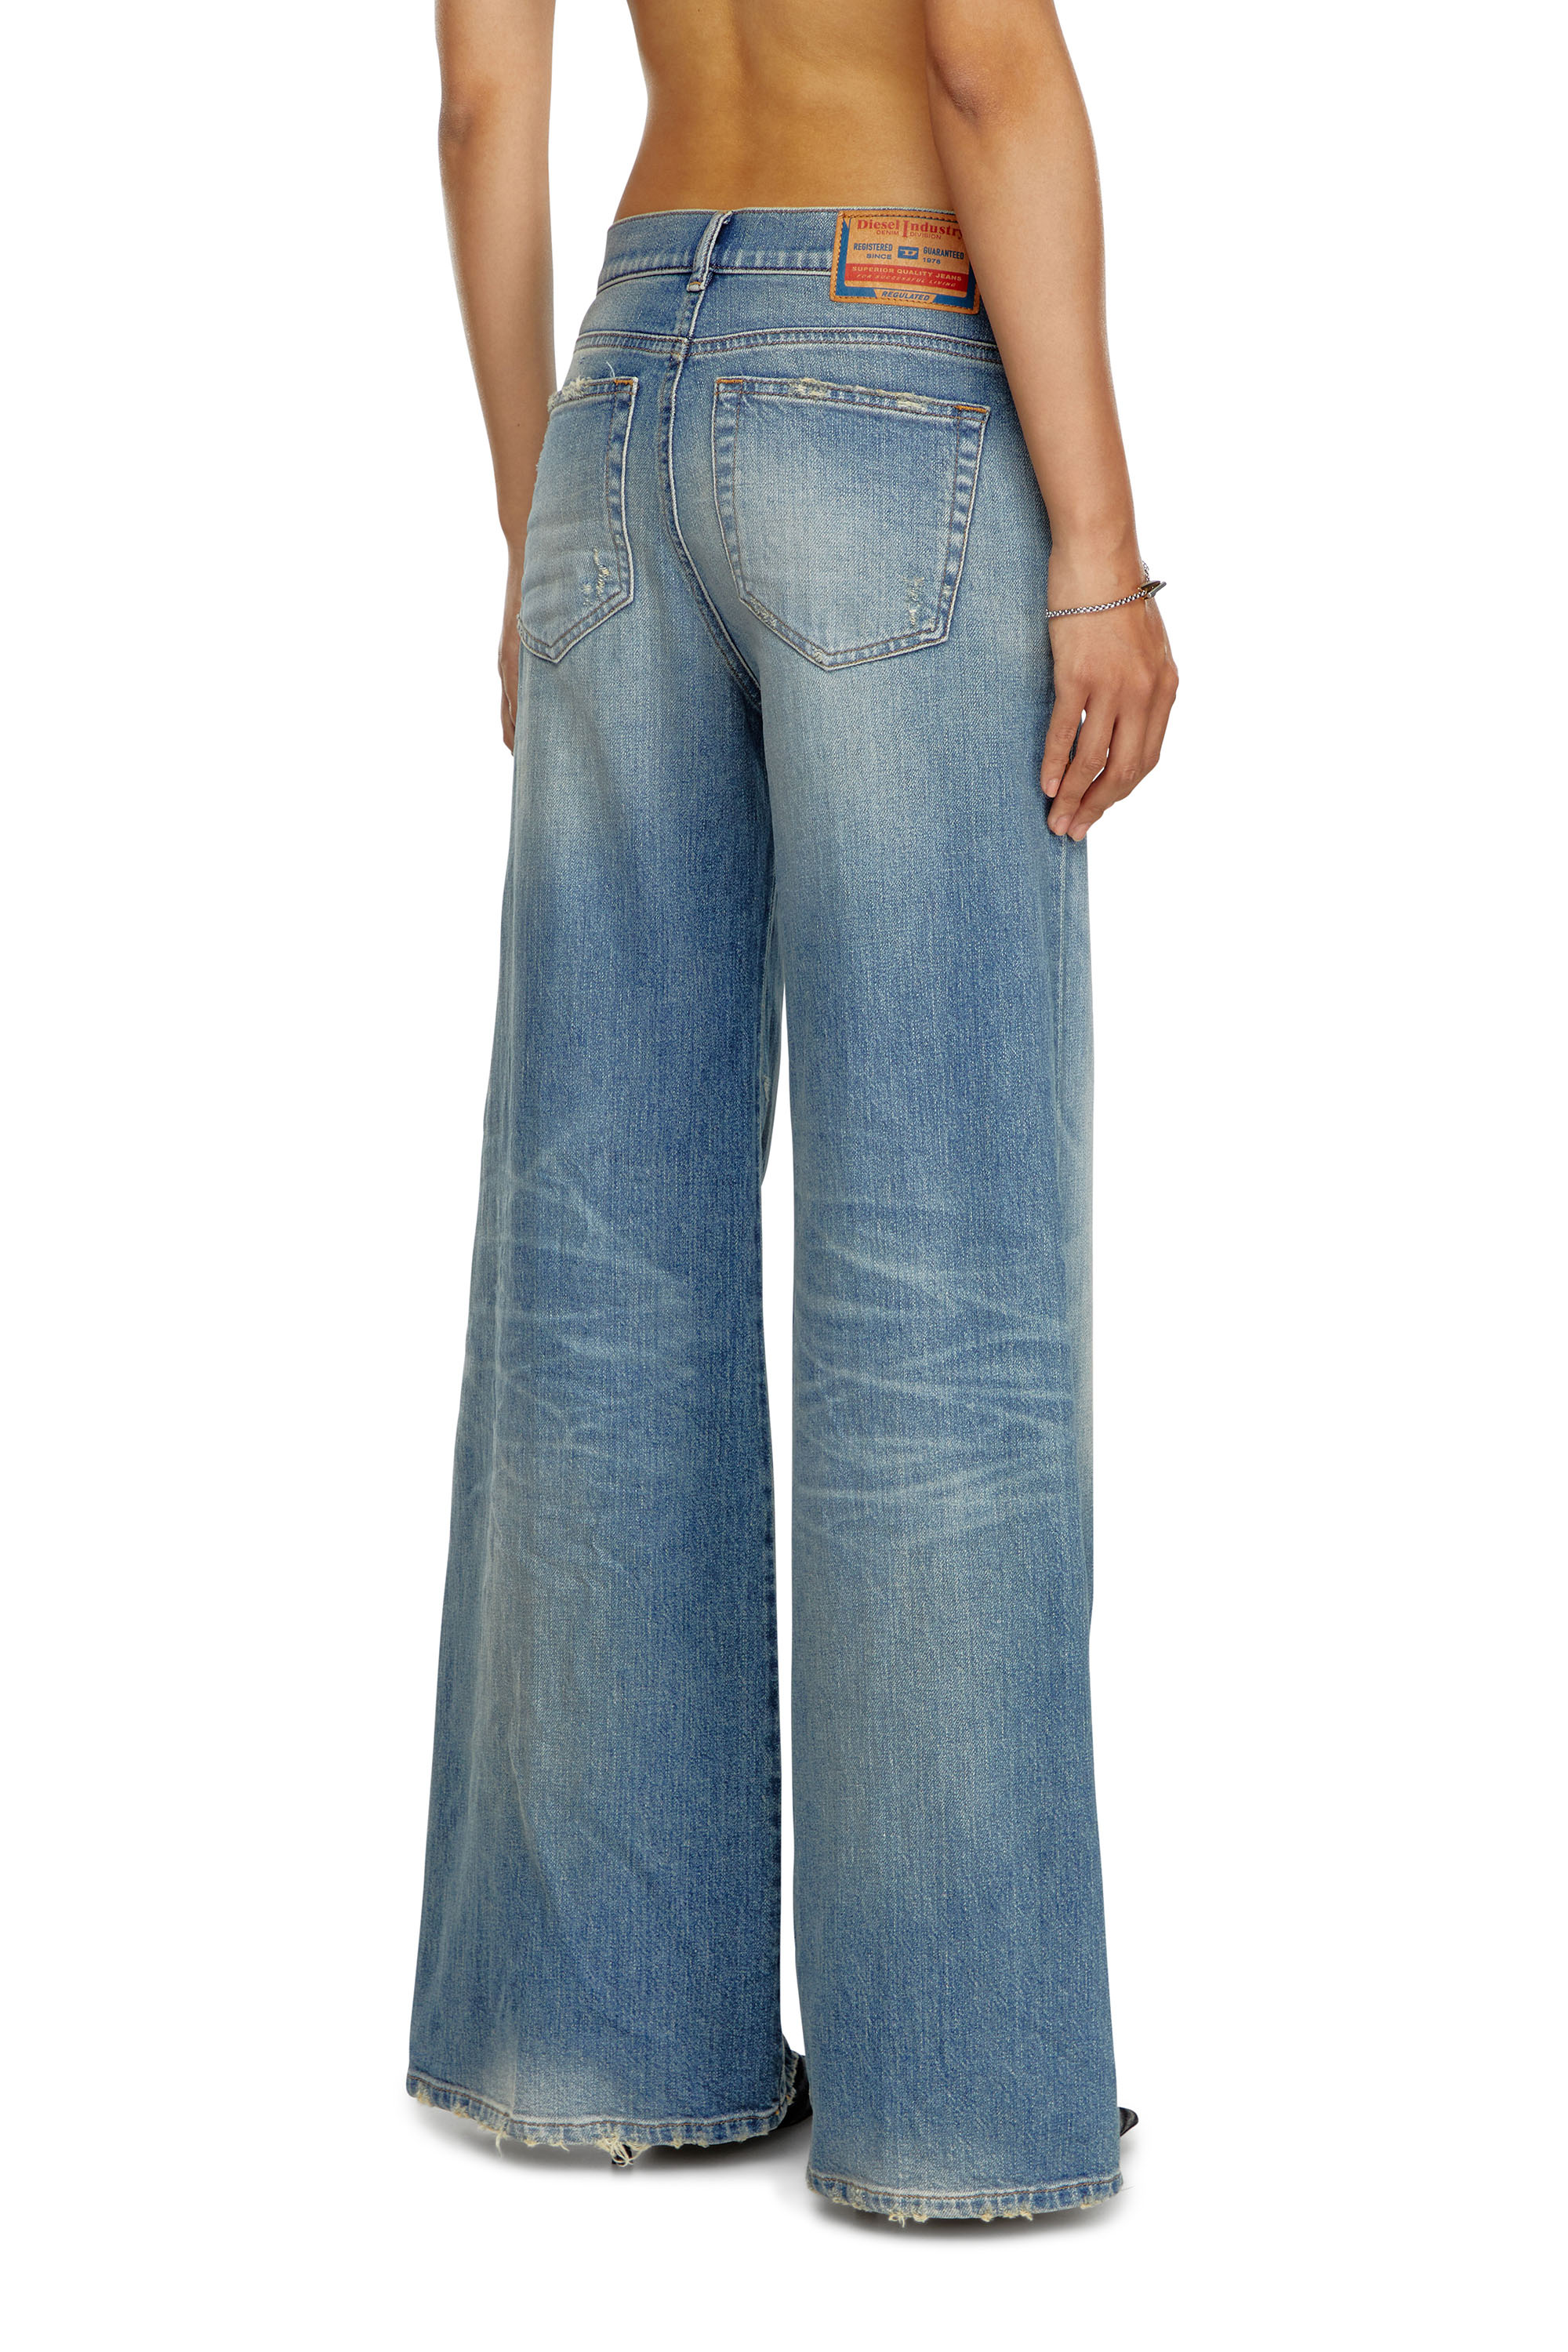 Diesel - Bootcut and Flare Jeans 1978 D-Akemi 09J44, Mujer Bootcut y Flare Jeans - 1978 D-Akemi in Azul marino - Image 3